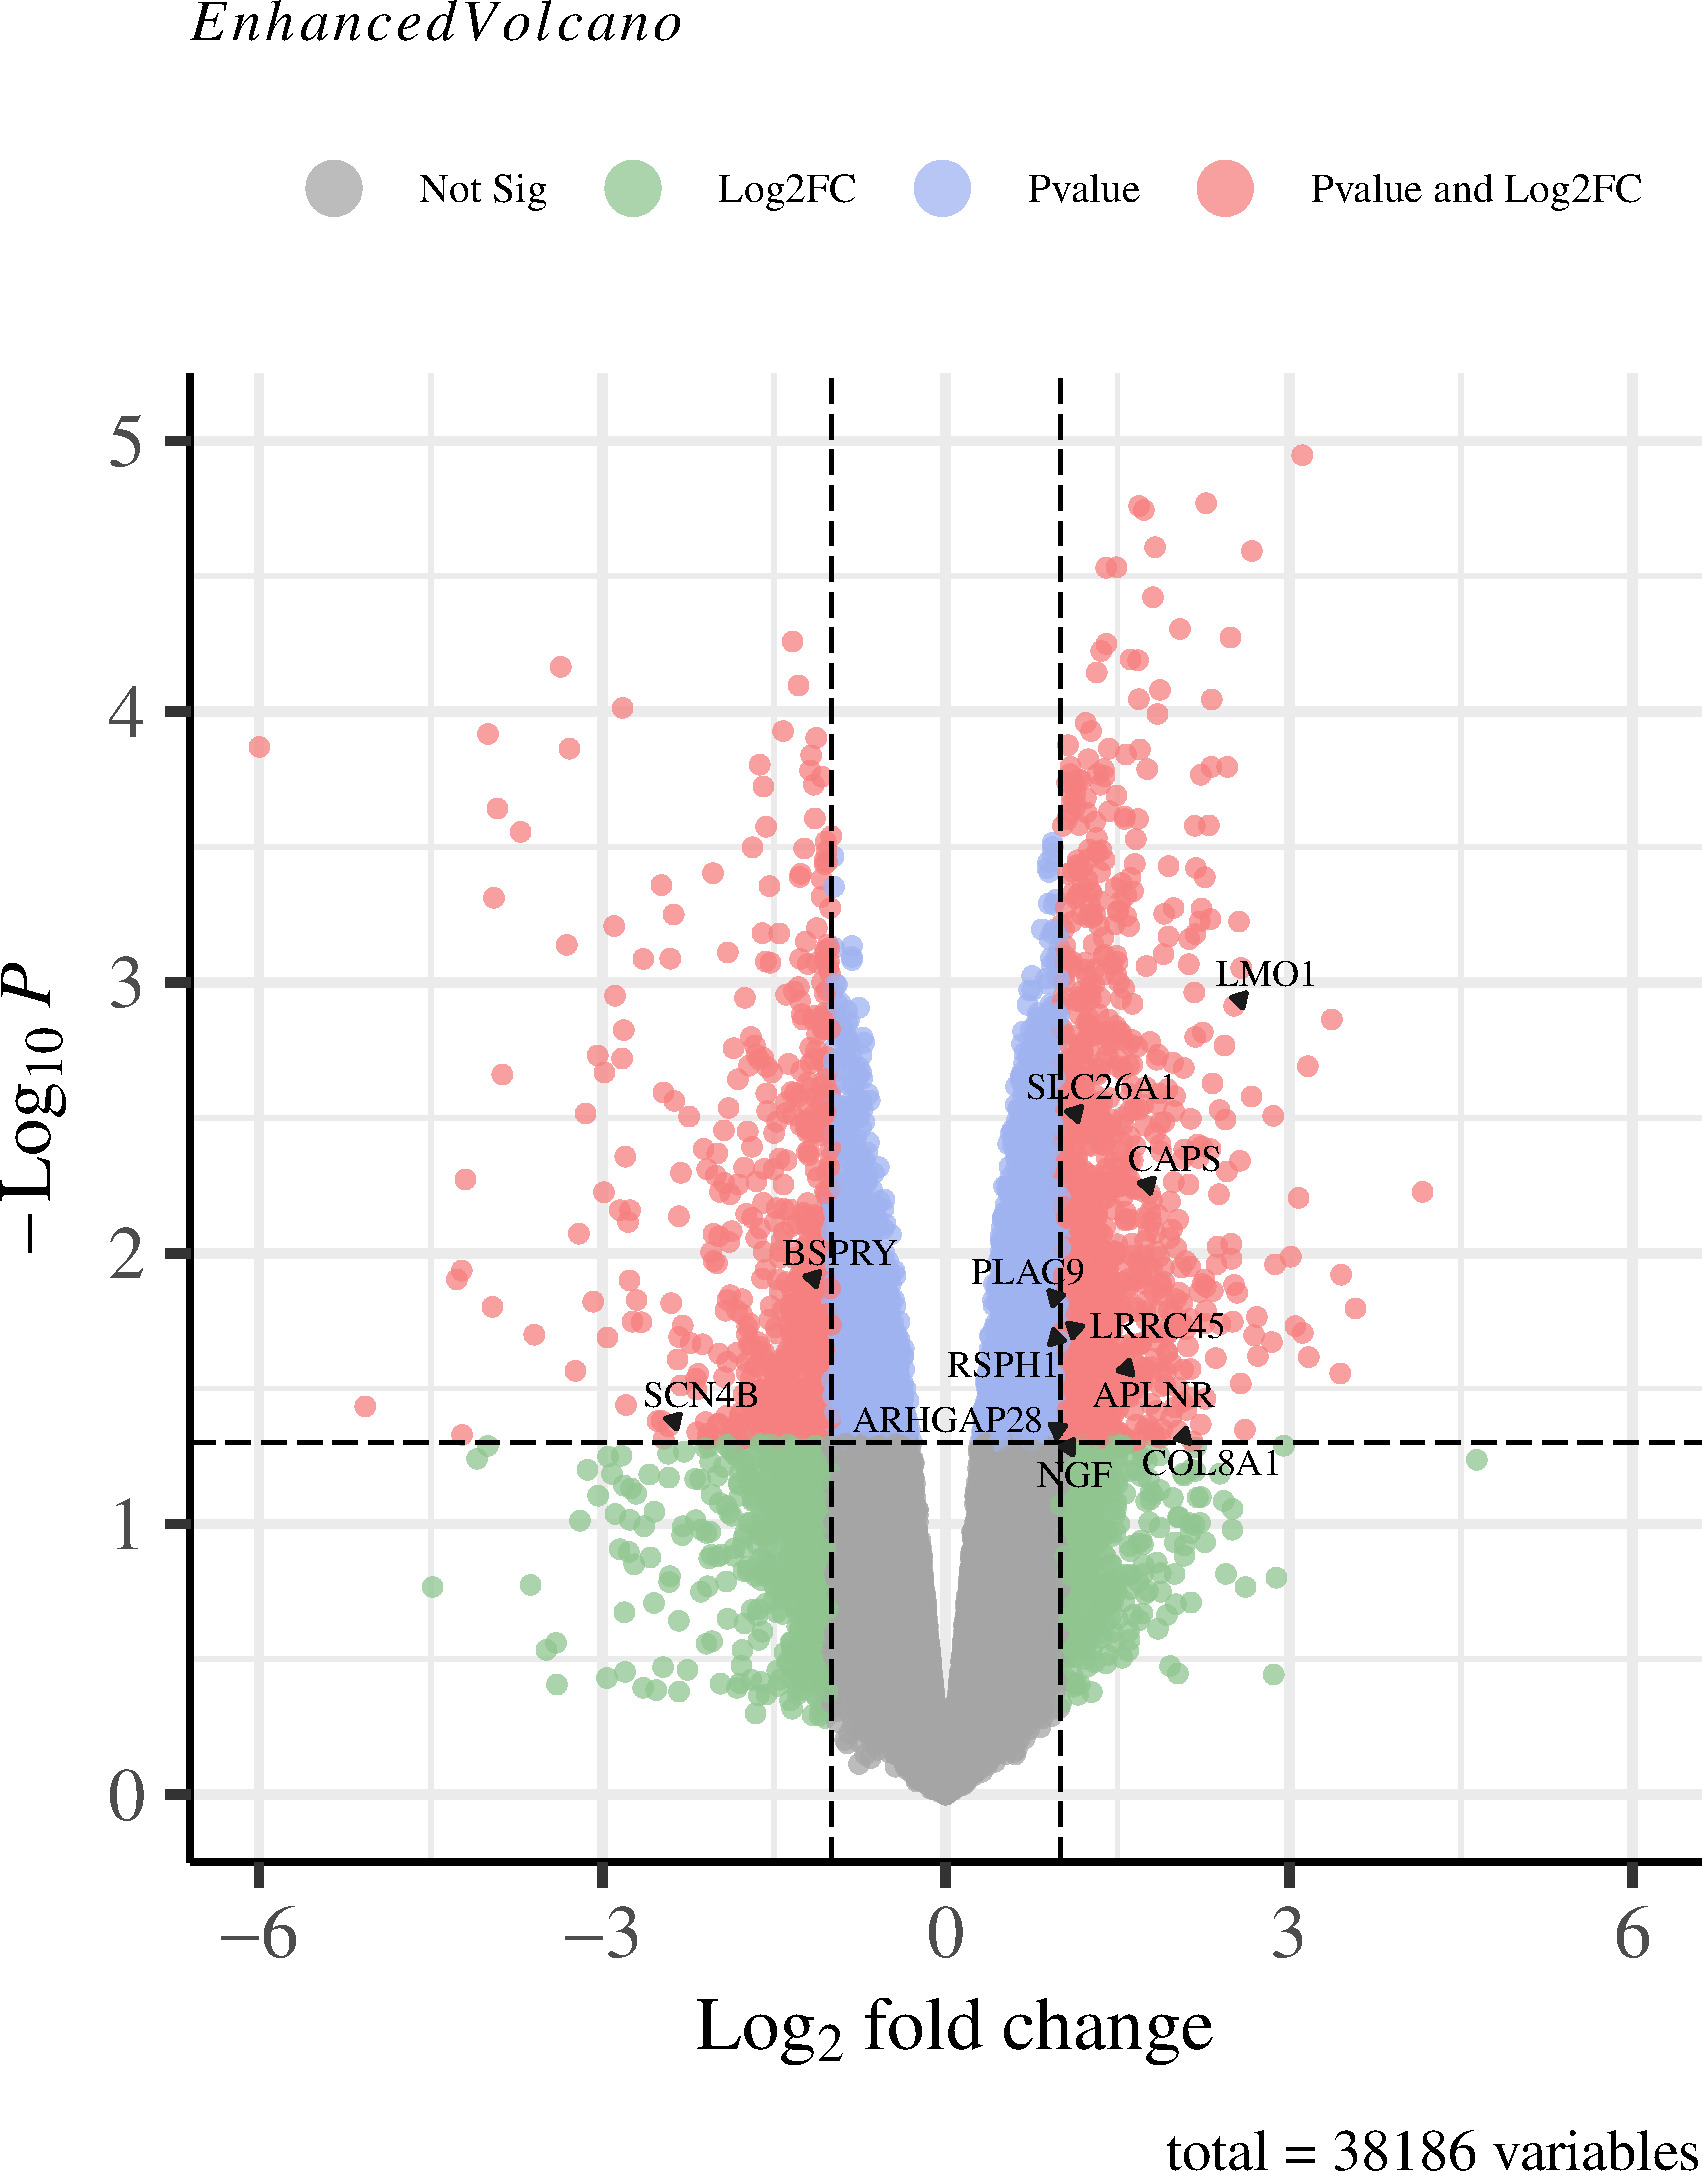 Fig. 2 
            Volcano plot of messenger RNA (mRNA) expression profiles for degenerative cervical spondylosis (DCS). Genes were marked in red point as differentially expressed when the following two conditions were met: p < 0.05 by the moderated t statistic and |logFC| > 1. APLNR, apelin receptor, angiotensin receptor-like 1; logFC, log fold change; ARHGAP28, Rho GTPase-activating protein 28; BSPRY, B box and SPRY domain-containing protein; CAPS, calcyphosine; COL8A1, collagen type VIII alpha 1; LMO1, LIM domain only 1; LRRC45, leucine-rich repeat-containing protein 45; NGF, nerve growth factor; PLAC9, placenta specific protein 9; RSPH1, radial spoke head 1 homolog; SCN4B, sodium channel, voltage-gated, type IV, beta; SLC26A1, solute carrier family 26 member 1.
          